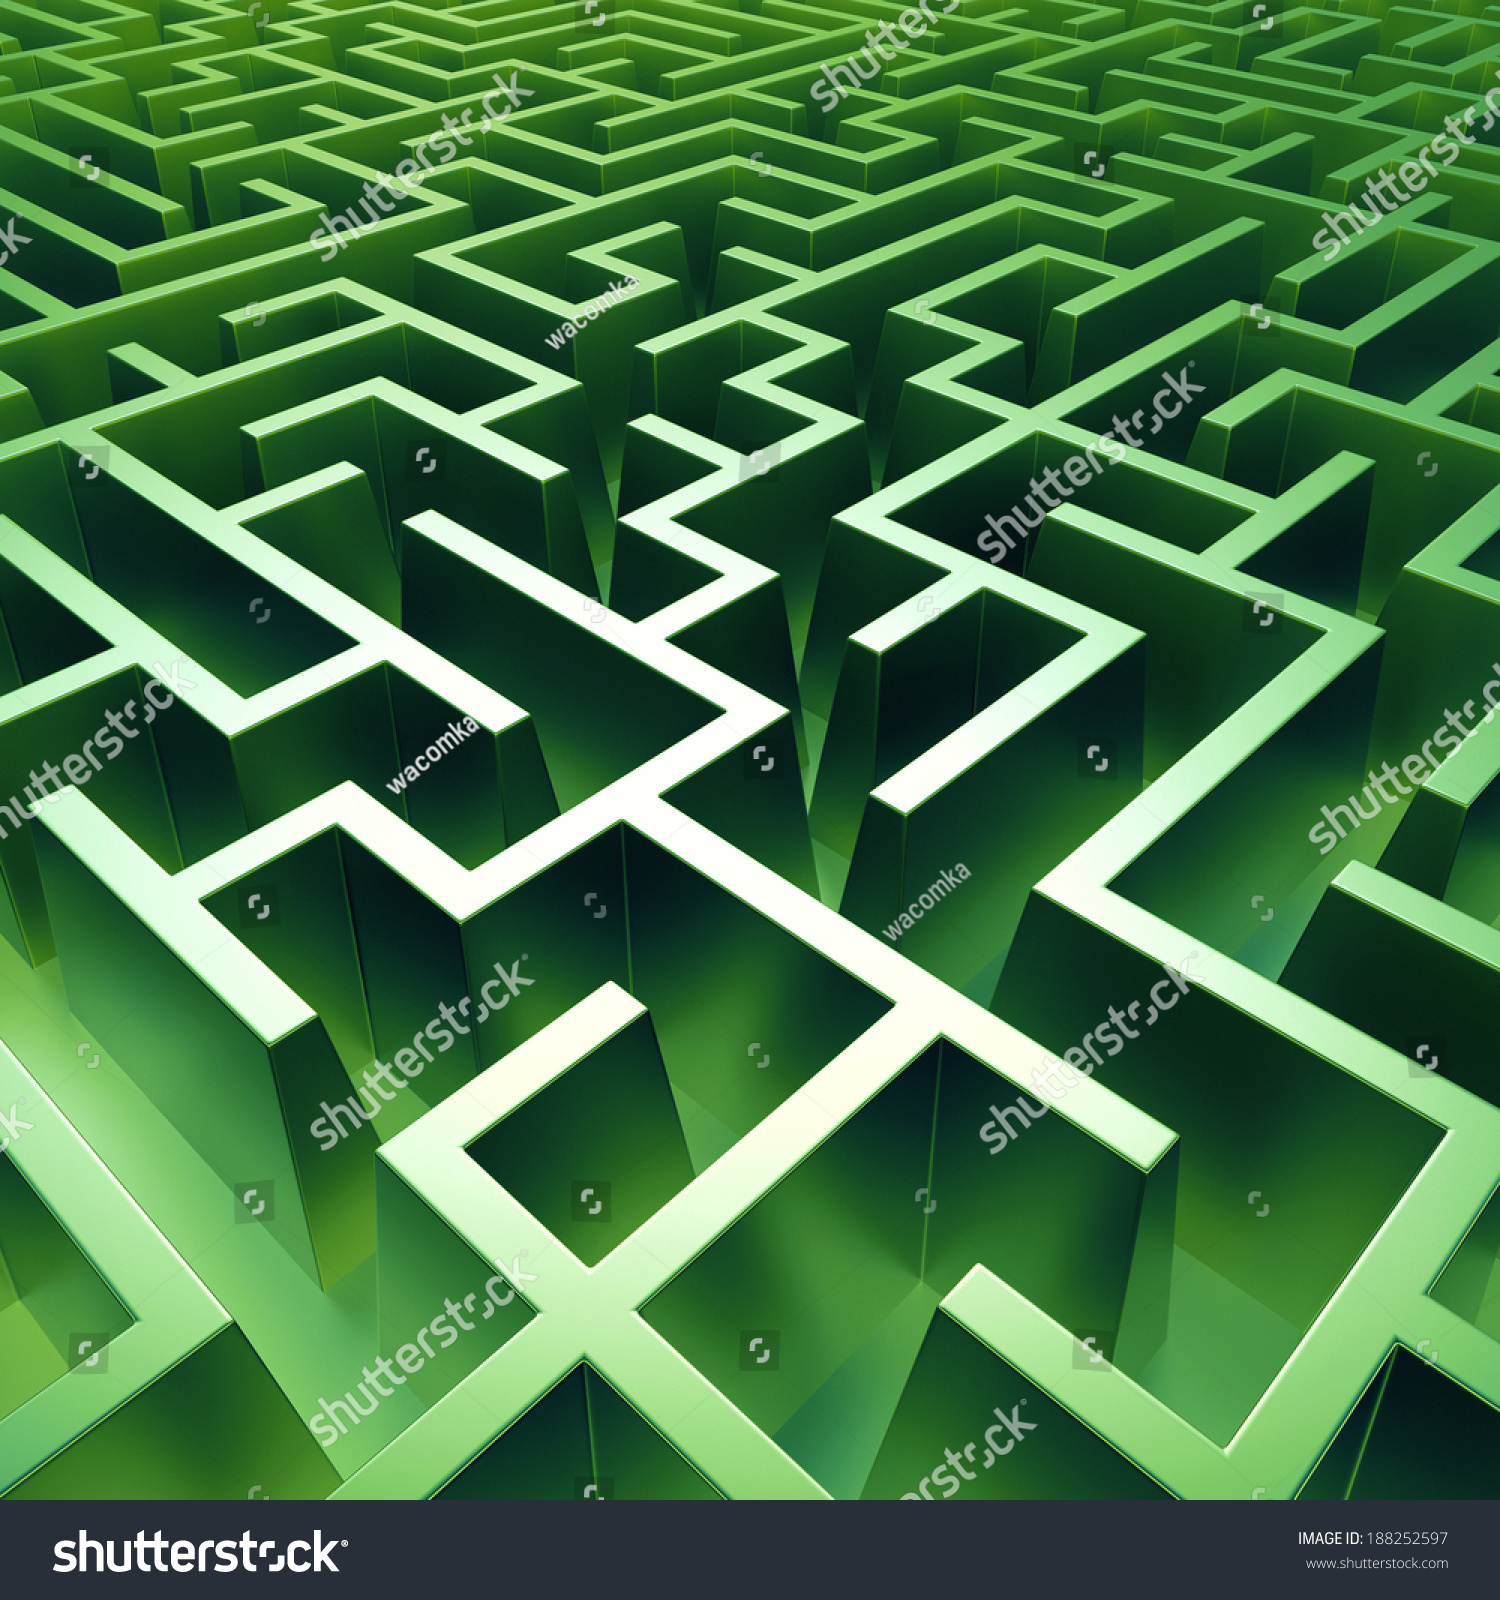 3d Abstract Green Maze Background Logic Stock Illustration 188252597 ...